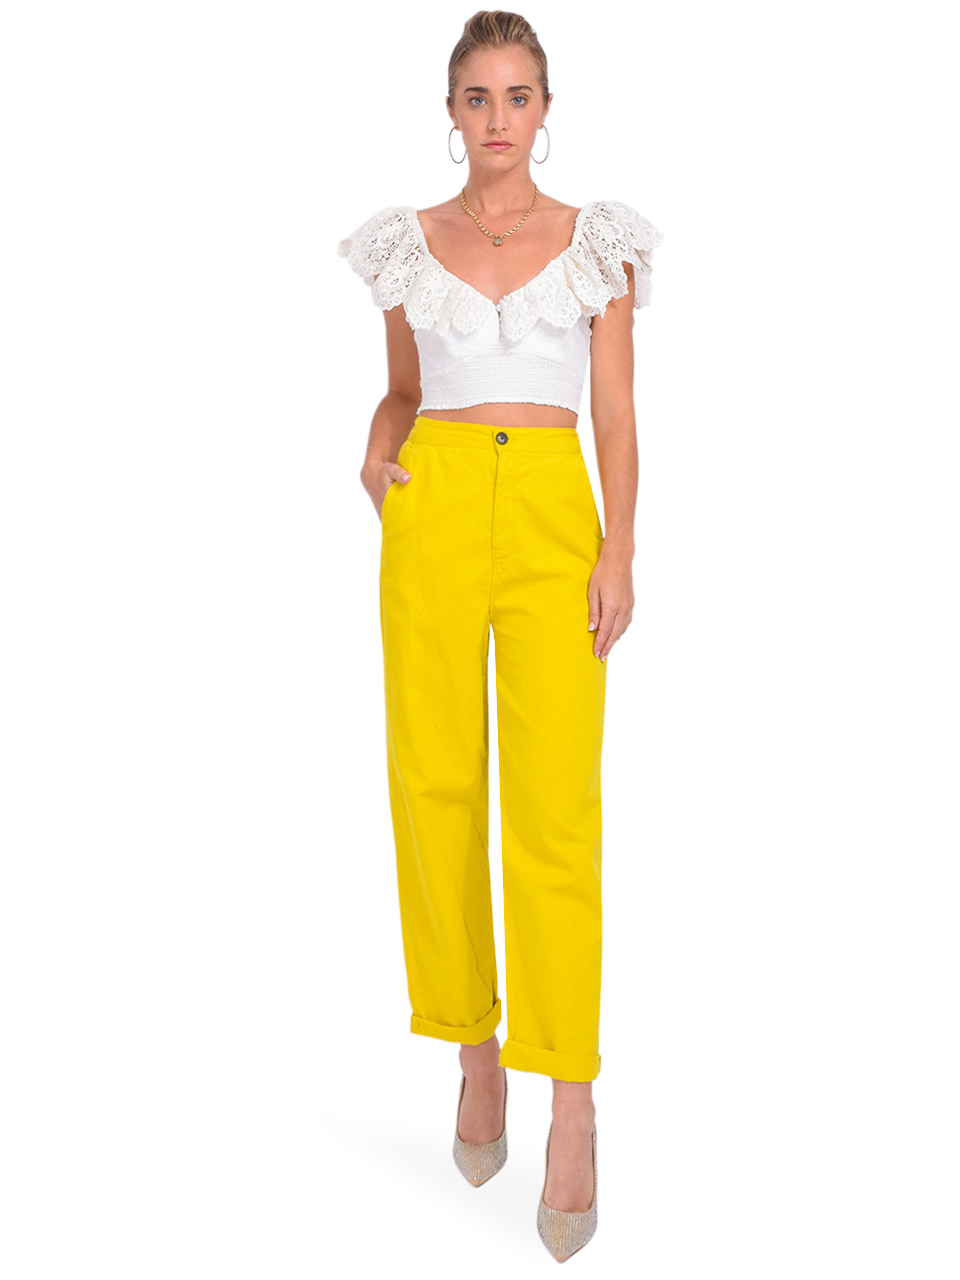 Alice + Olivia Bleeker Embroidered Smock Crop Top in White Full Outfit 